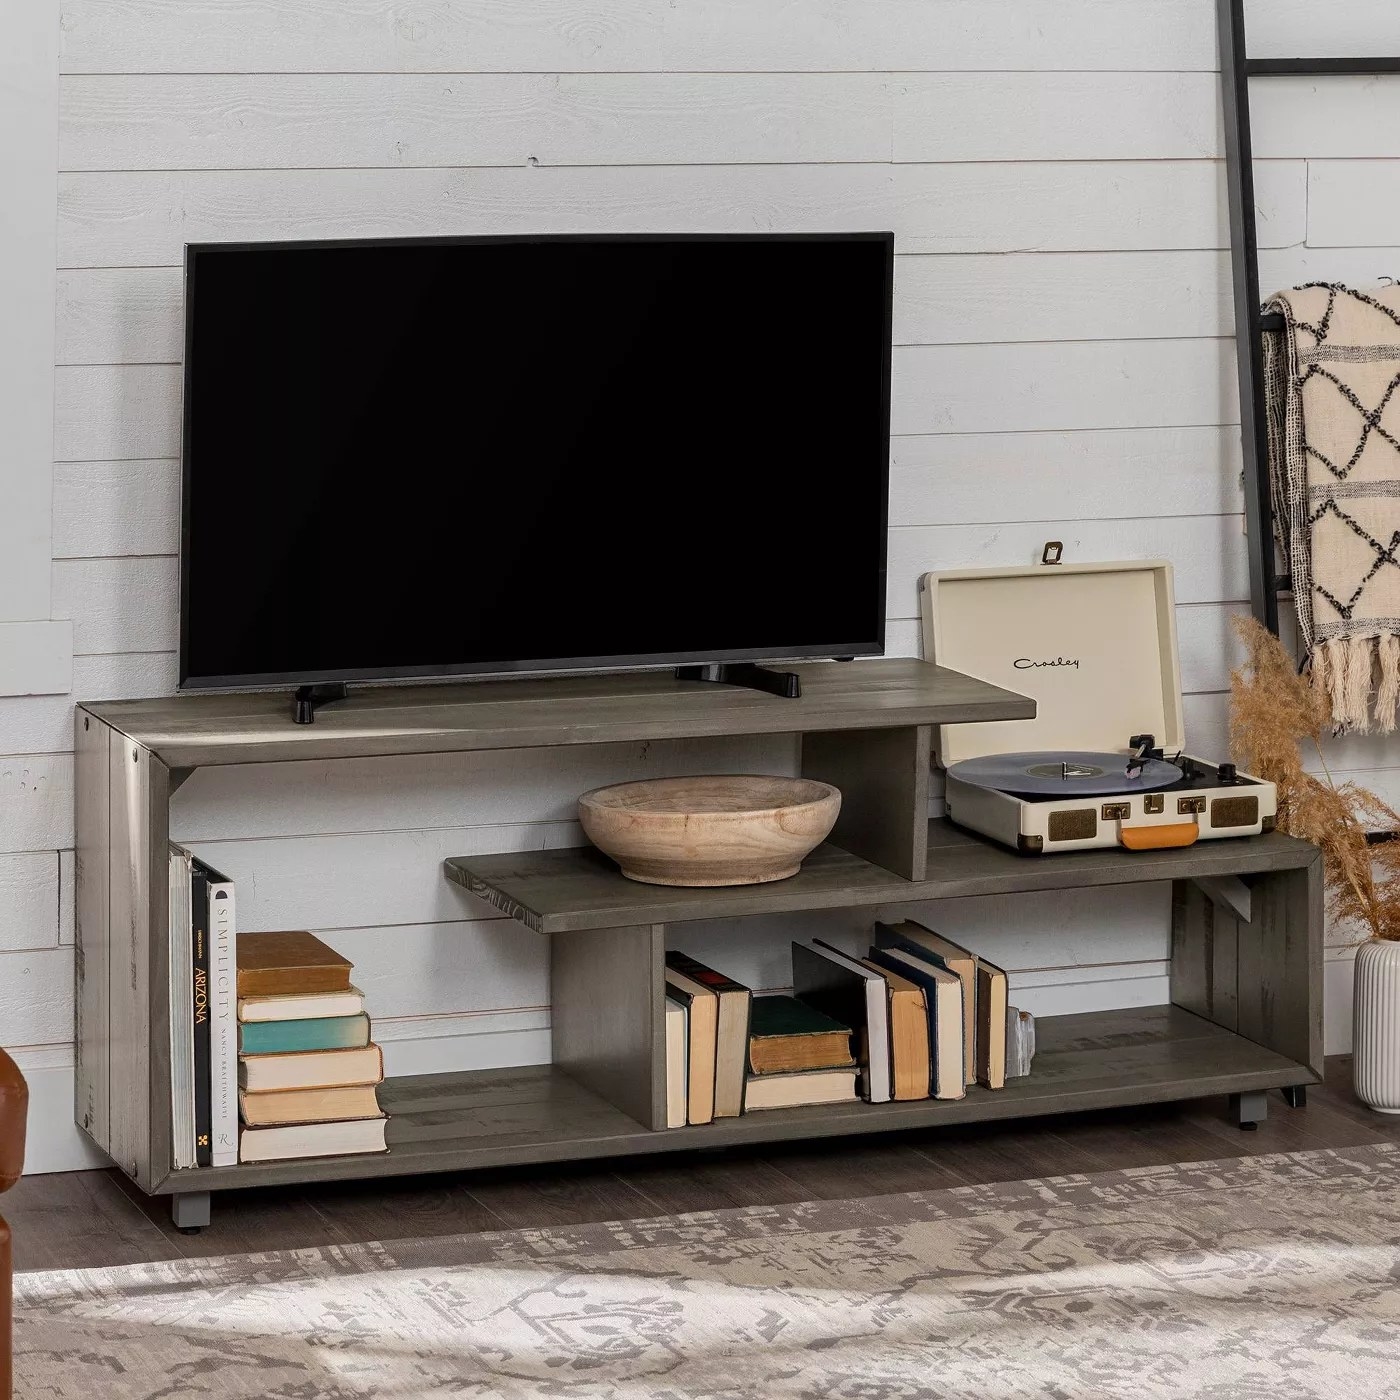 The TV stand in a gray wash